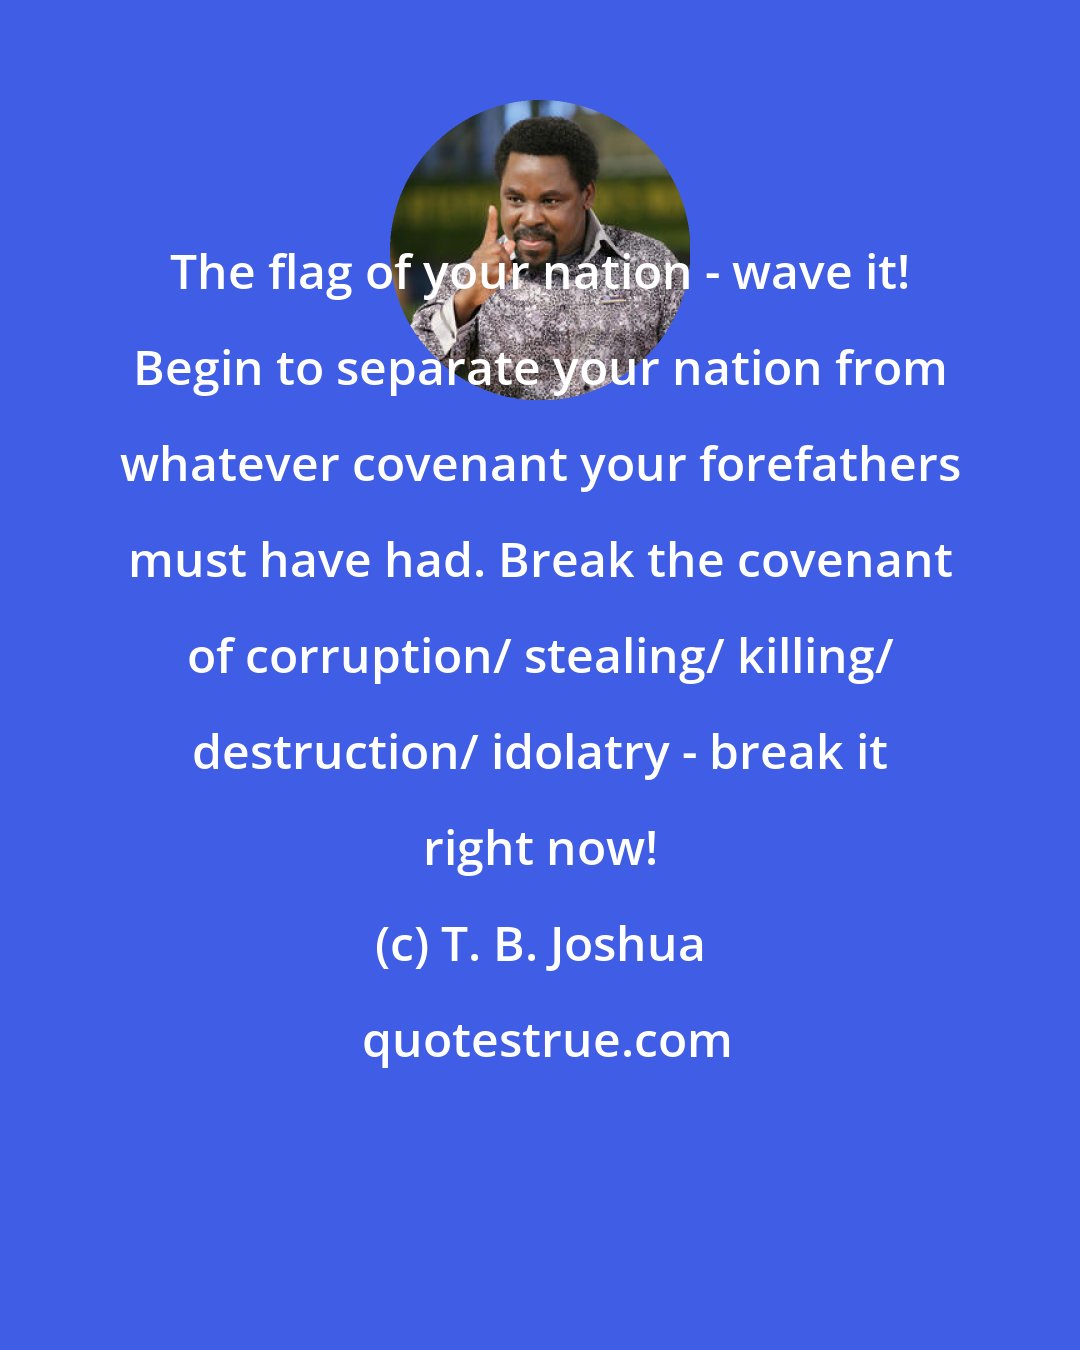 T. B. Joshua: The flag of your nation - wave it! Begin to separate your nation from whatever covenant your forefathers must have had. Break the covenant of corruption/ stealing/ killing/ destruction/ idolatry - break it right now!